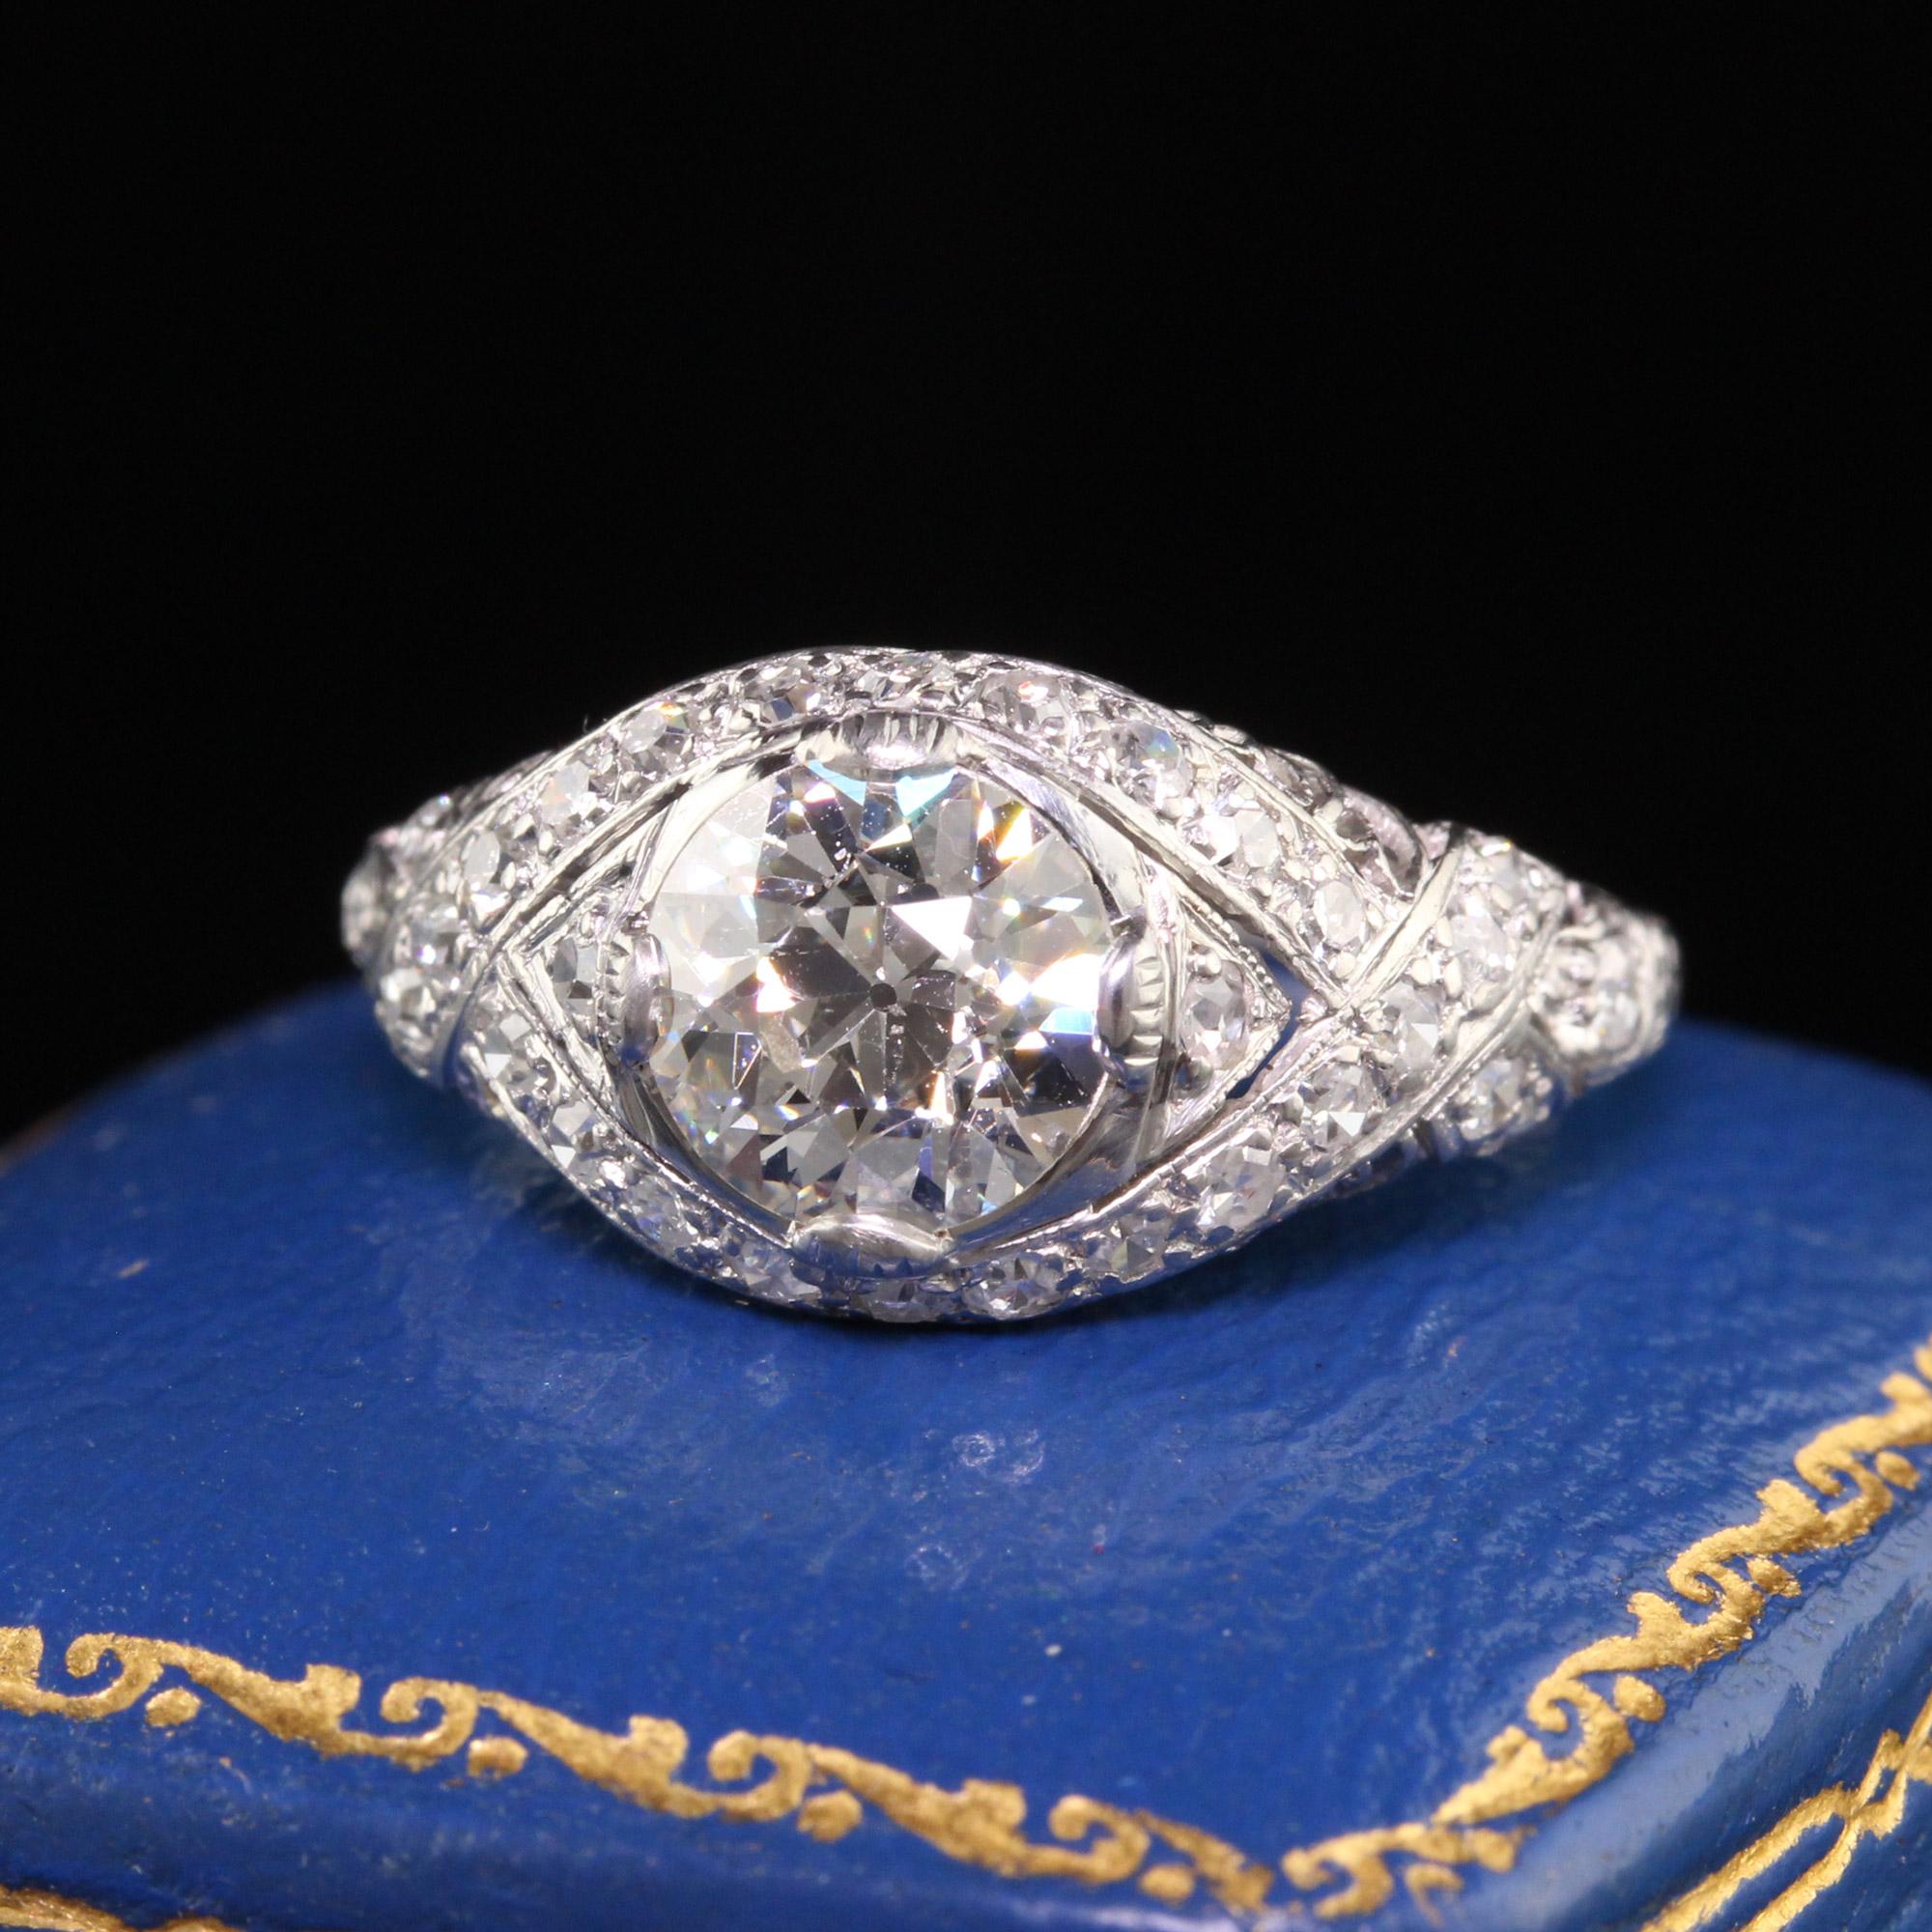 Beautiful Antique Art Deco Platinum Old European Diamond Filigree Engagement Ring. This incredible engagement ring is crafted in platinum. The center holds and old european cut diamond with single cut diamonds set in this intricate mounting. The